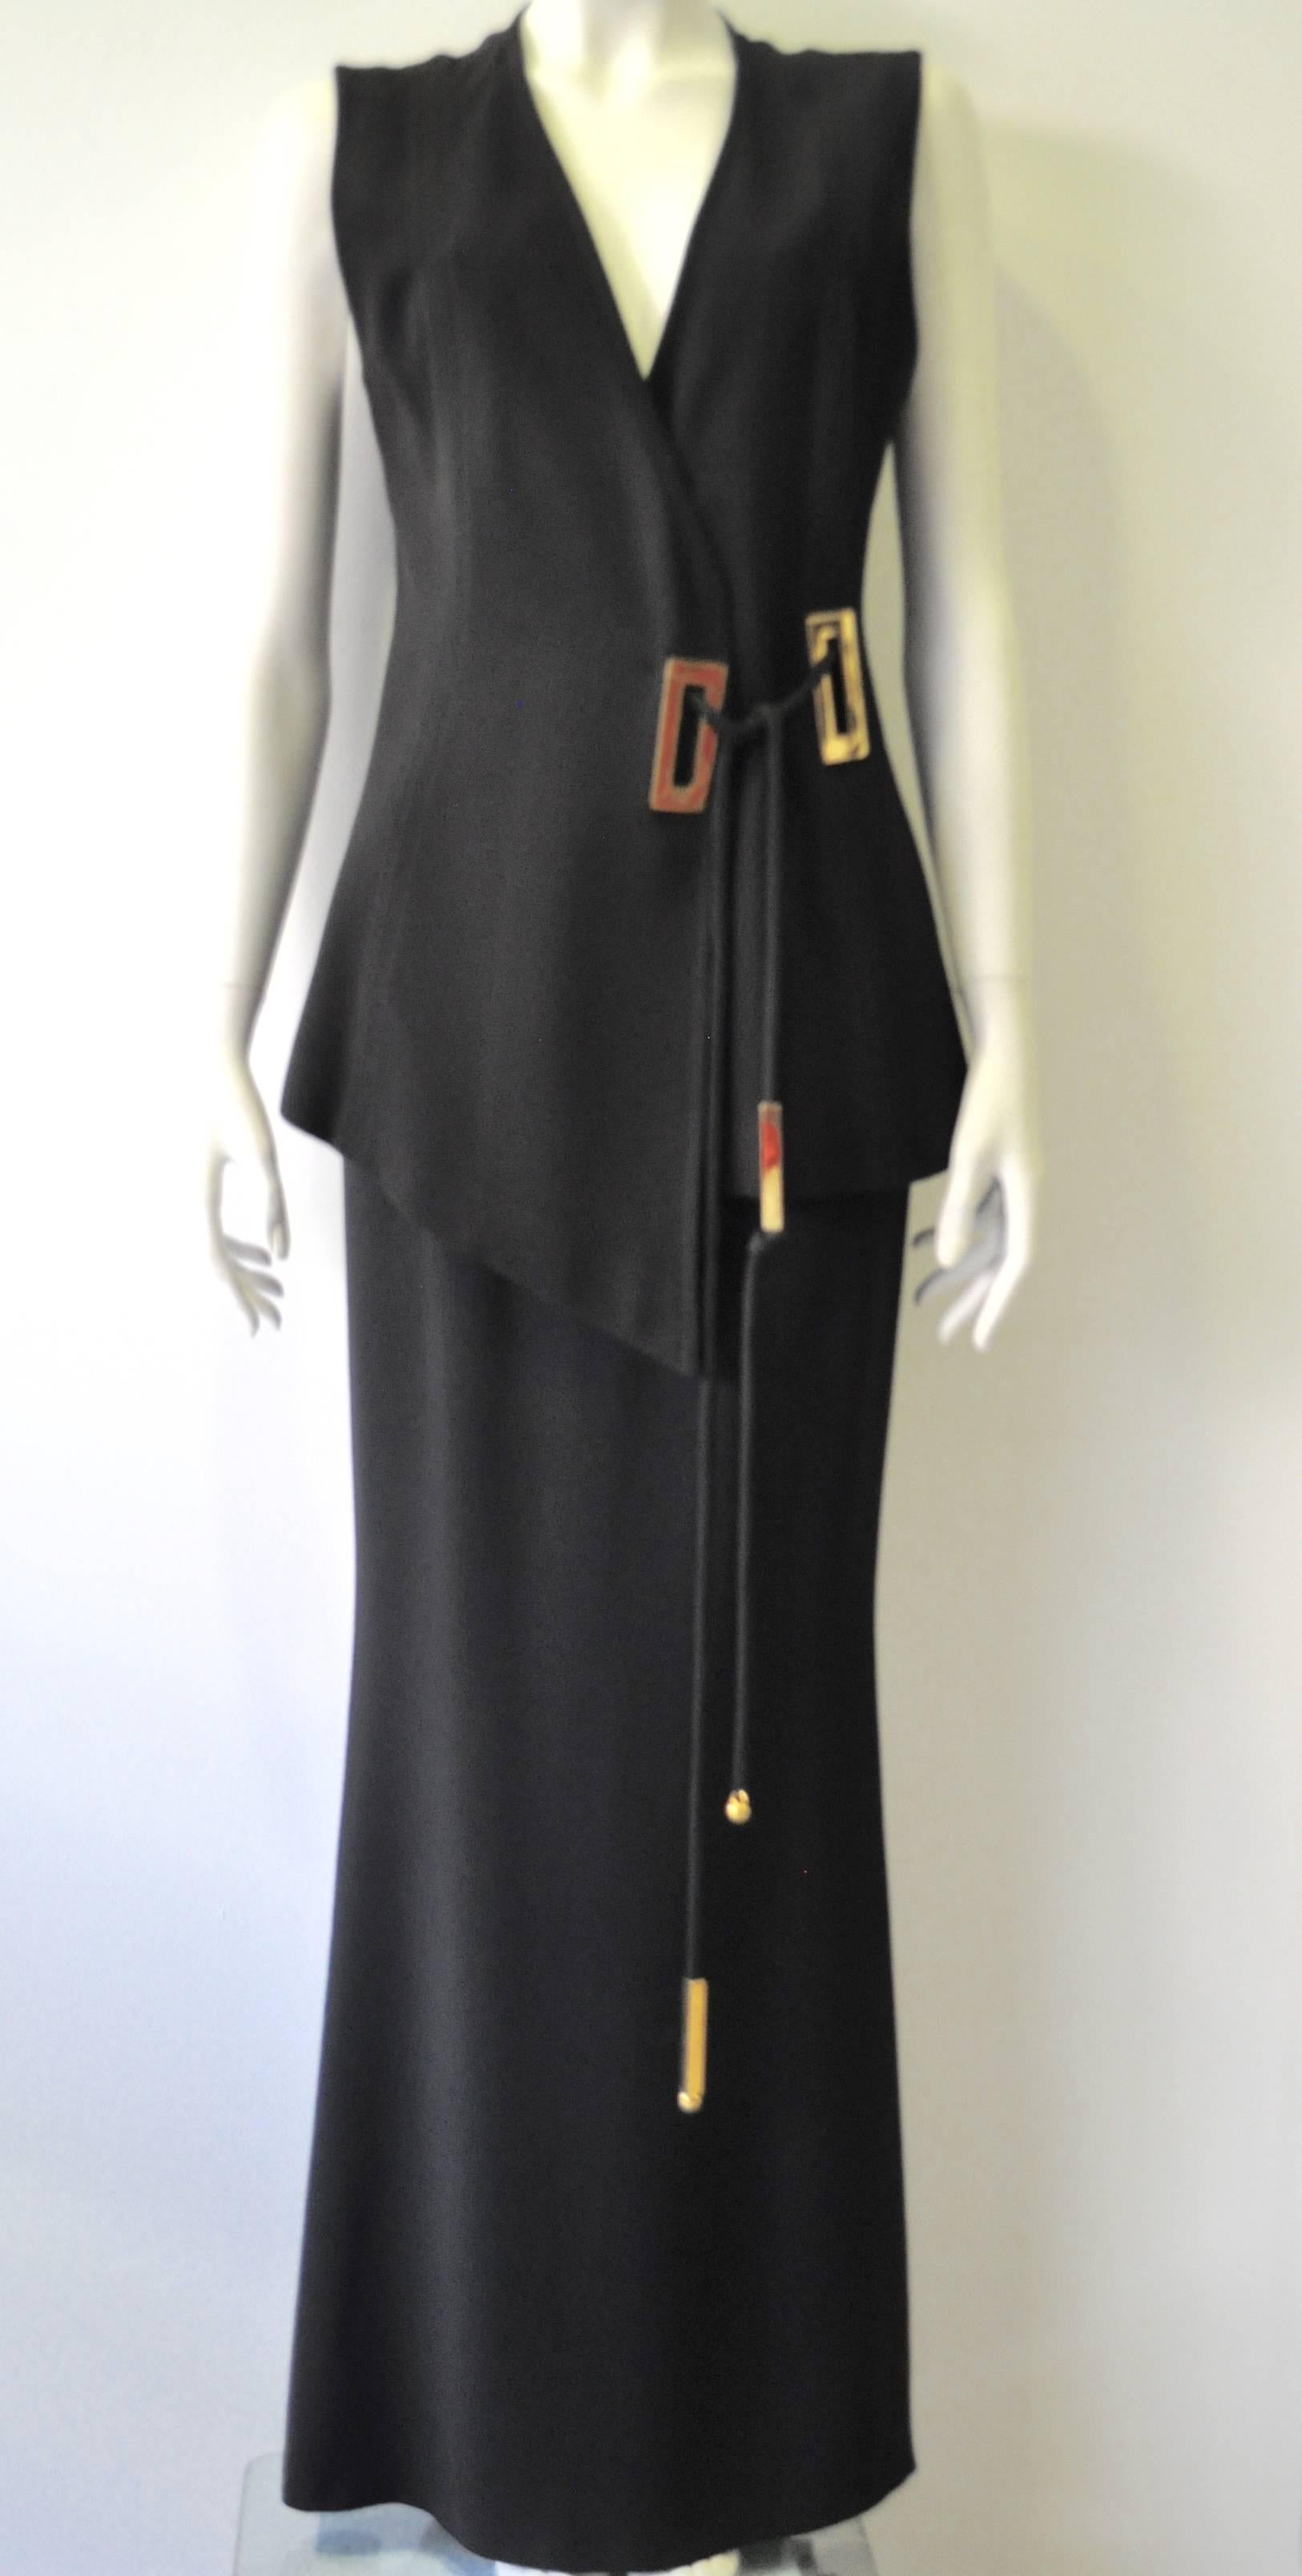 Exceptional Mod Angelo Mozzillo Long Vest over High Waisted Maxi Skirt featuring Gold Hardware Tassel and Subtle Contrast Stitching